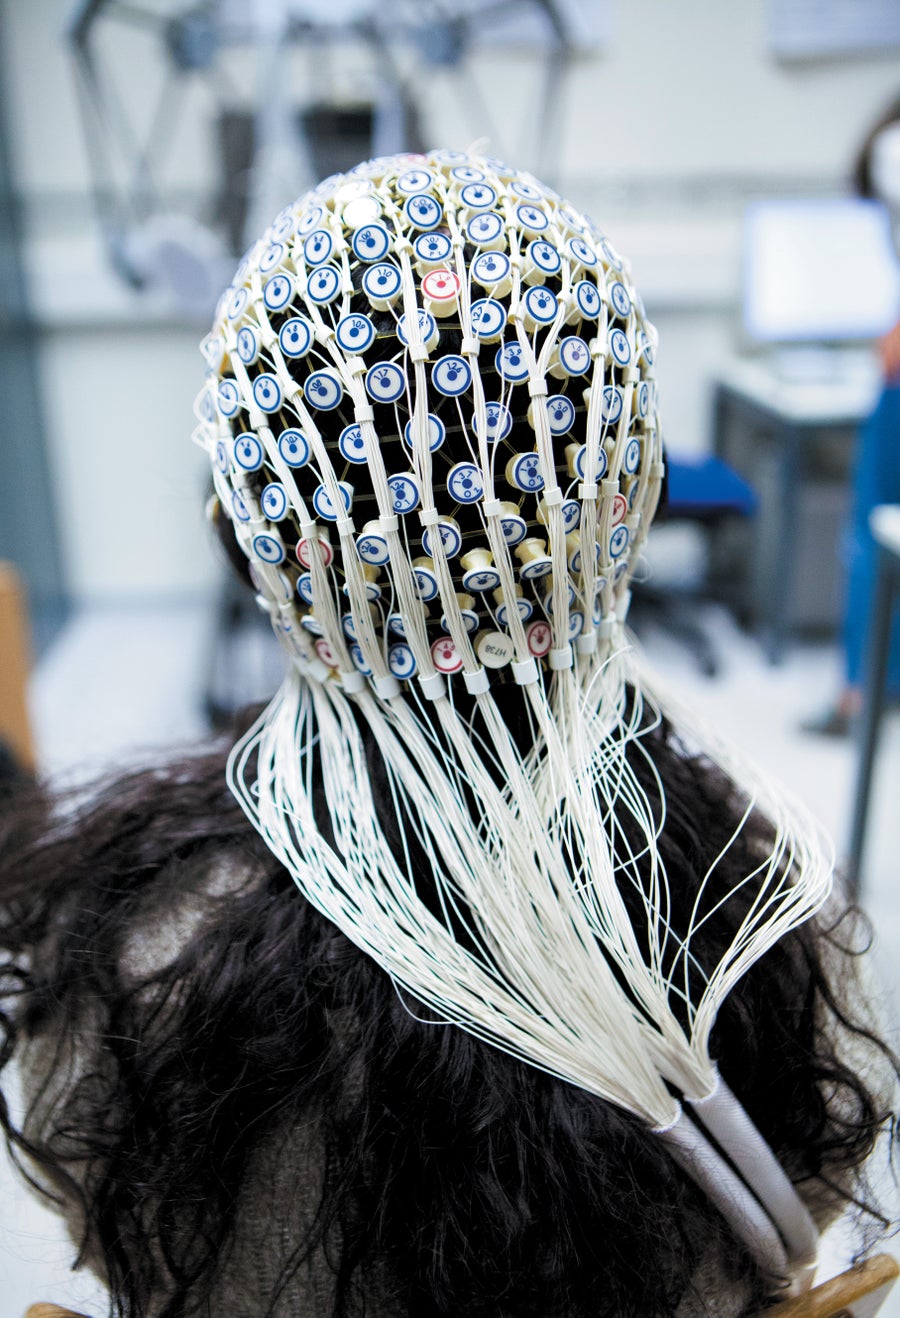 A person shown from behind wearing a head net of electrodes.